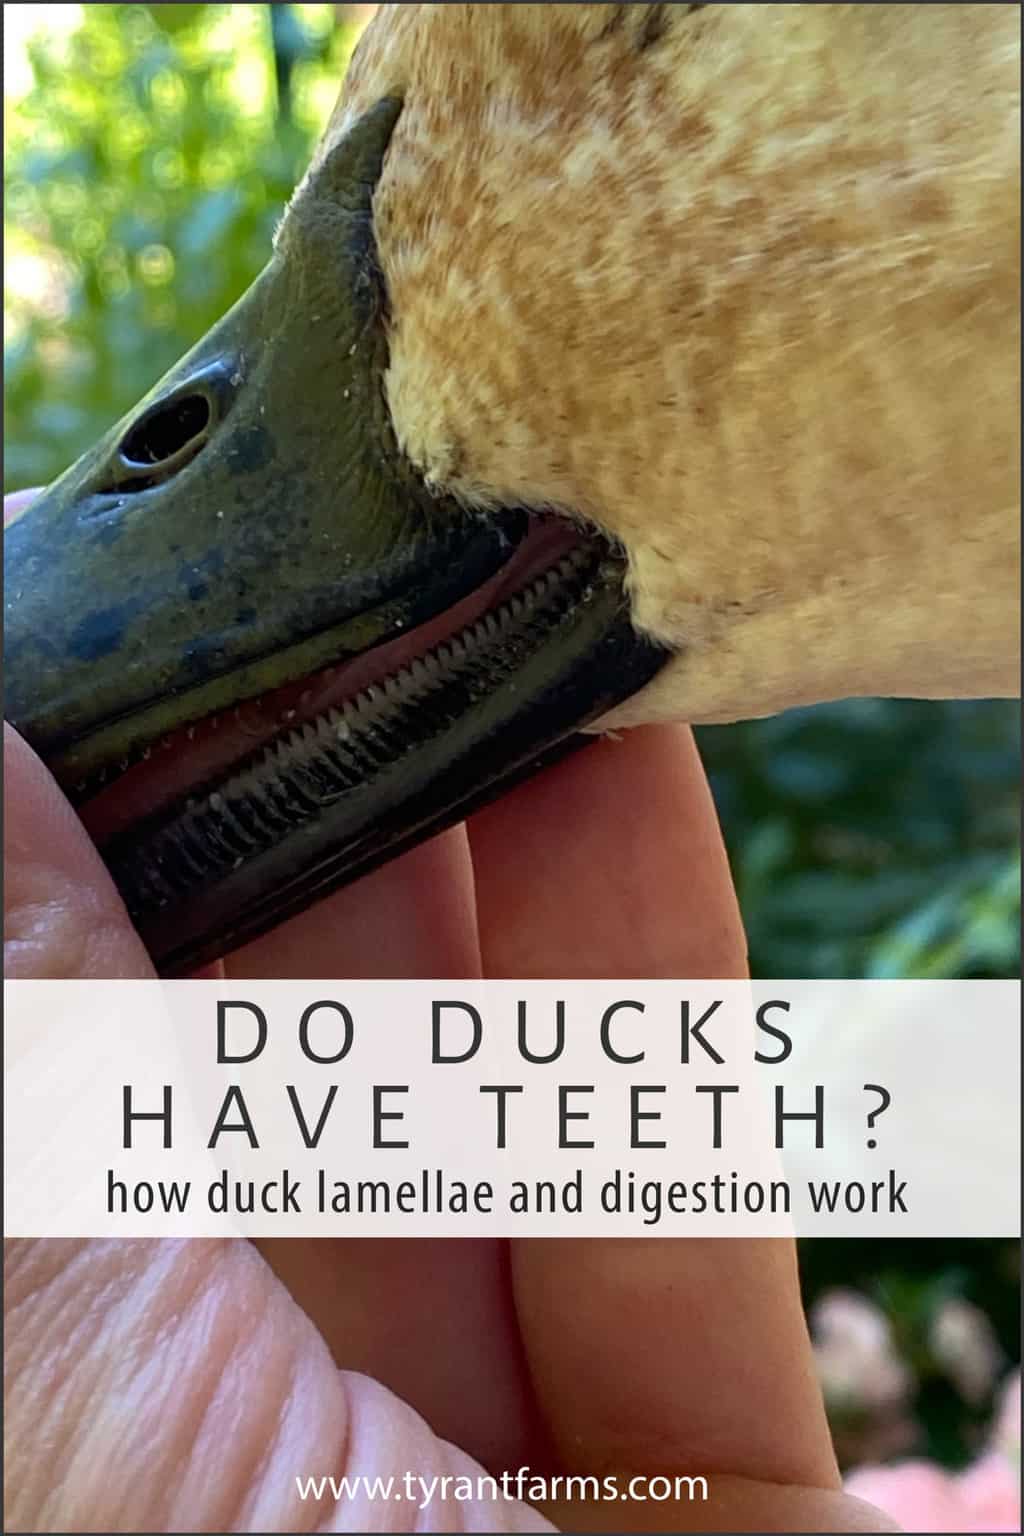 Do ducks have teeth? Find out how duck lamellae and digestion work